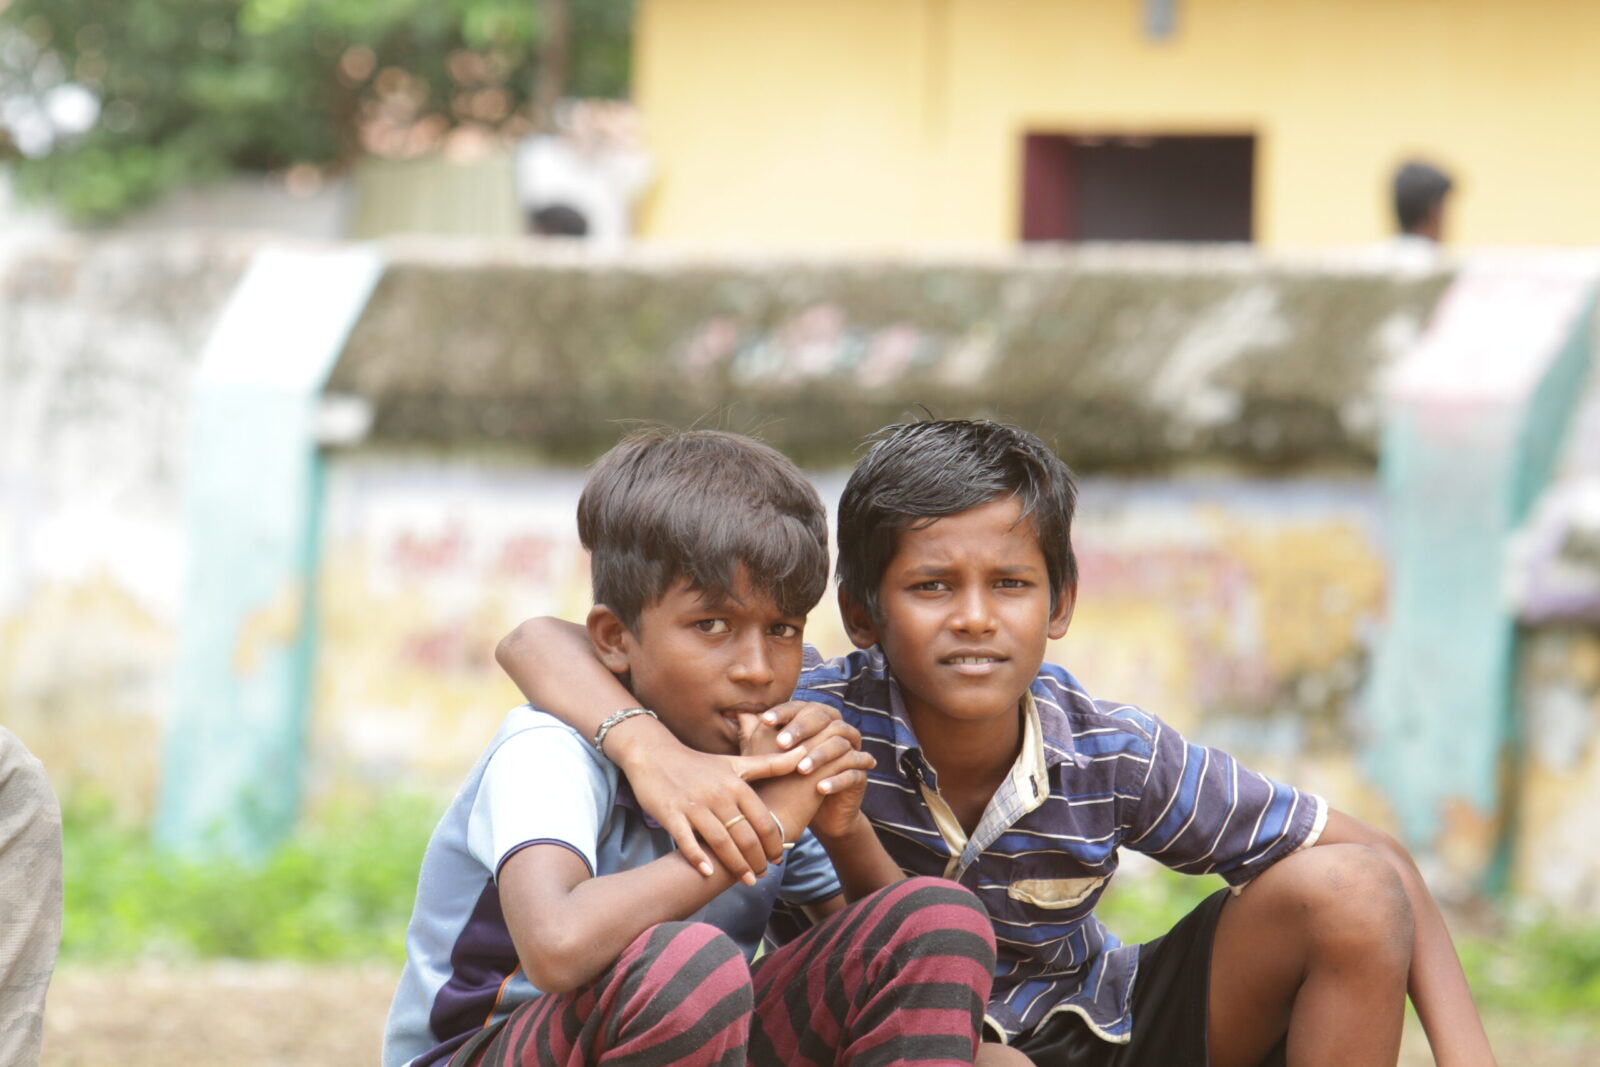 #Communities4Children - How Our Follow Up In Saravanan’s Community Helped Address His Latent Mental Health Condition